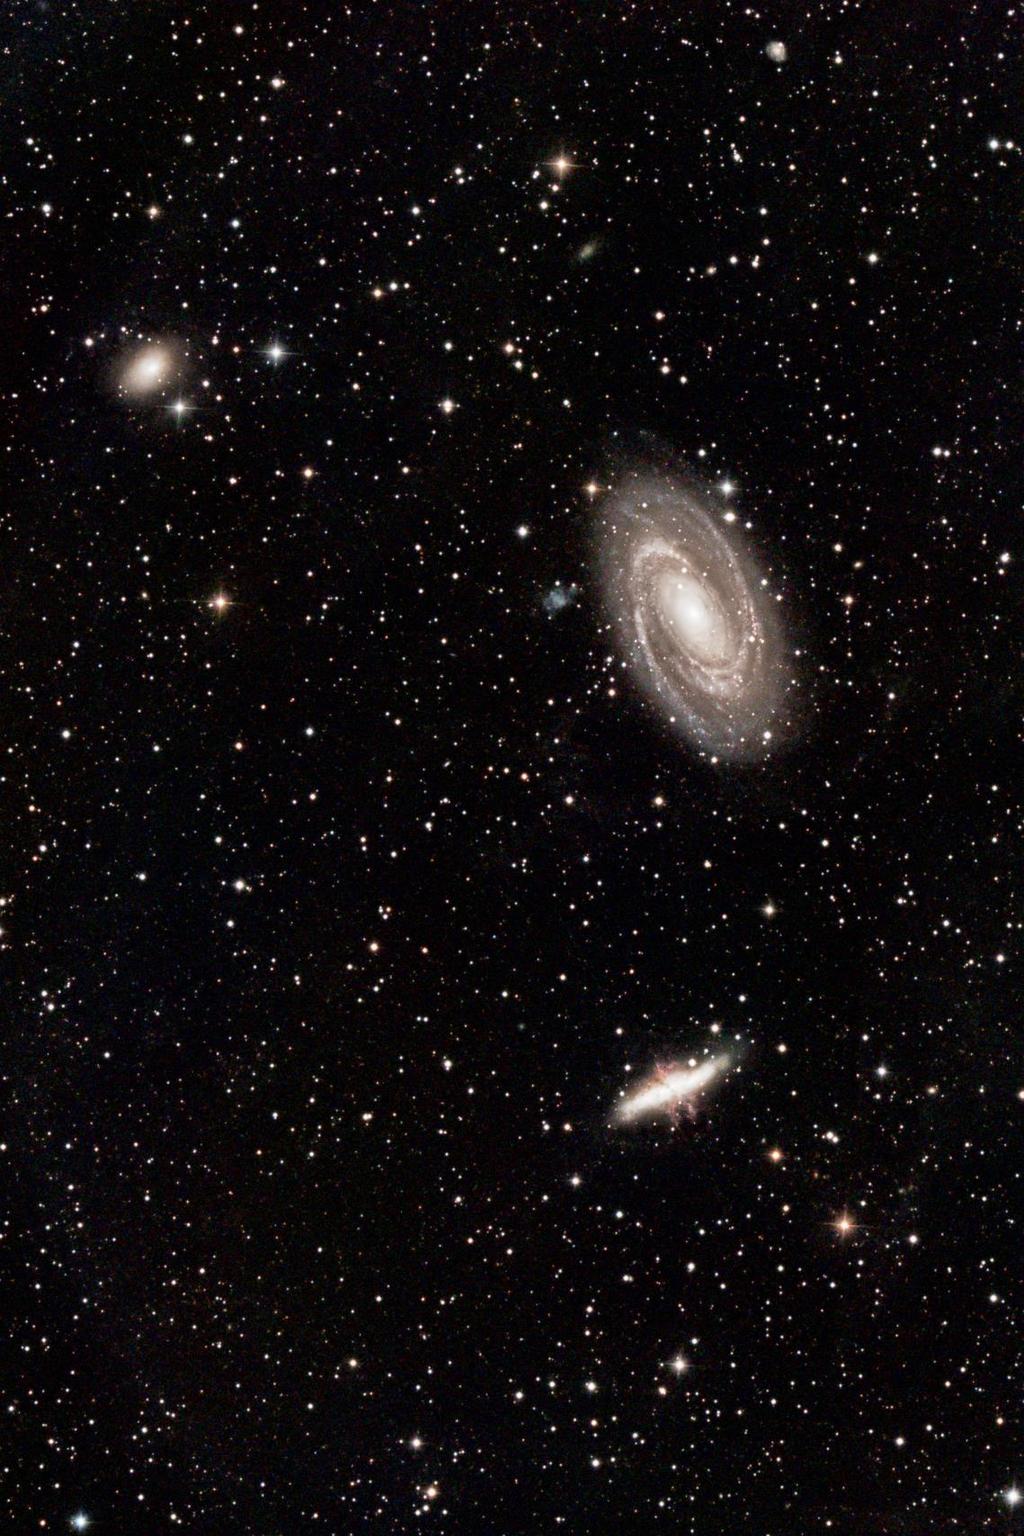 M81 by MJ Post on April 12 Copyright May 2018.